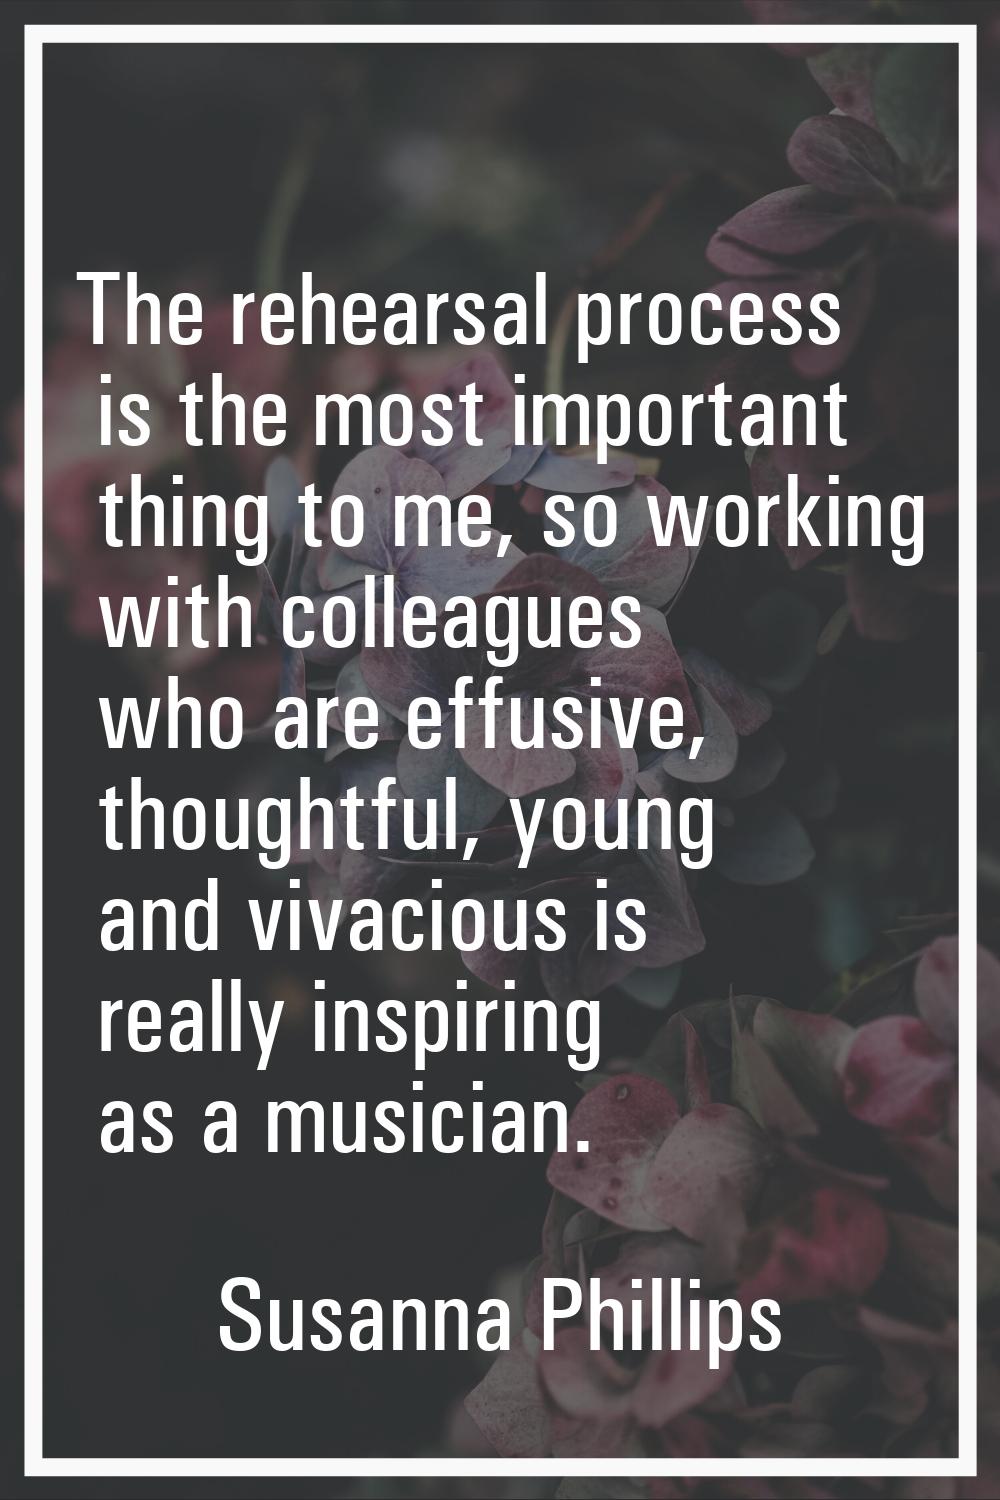 The rehearsal process is the most important thing to me, so working with colleagues who are effusiv